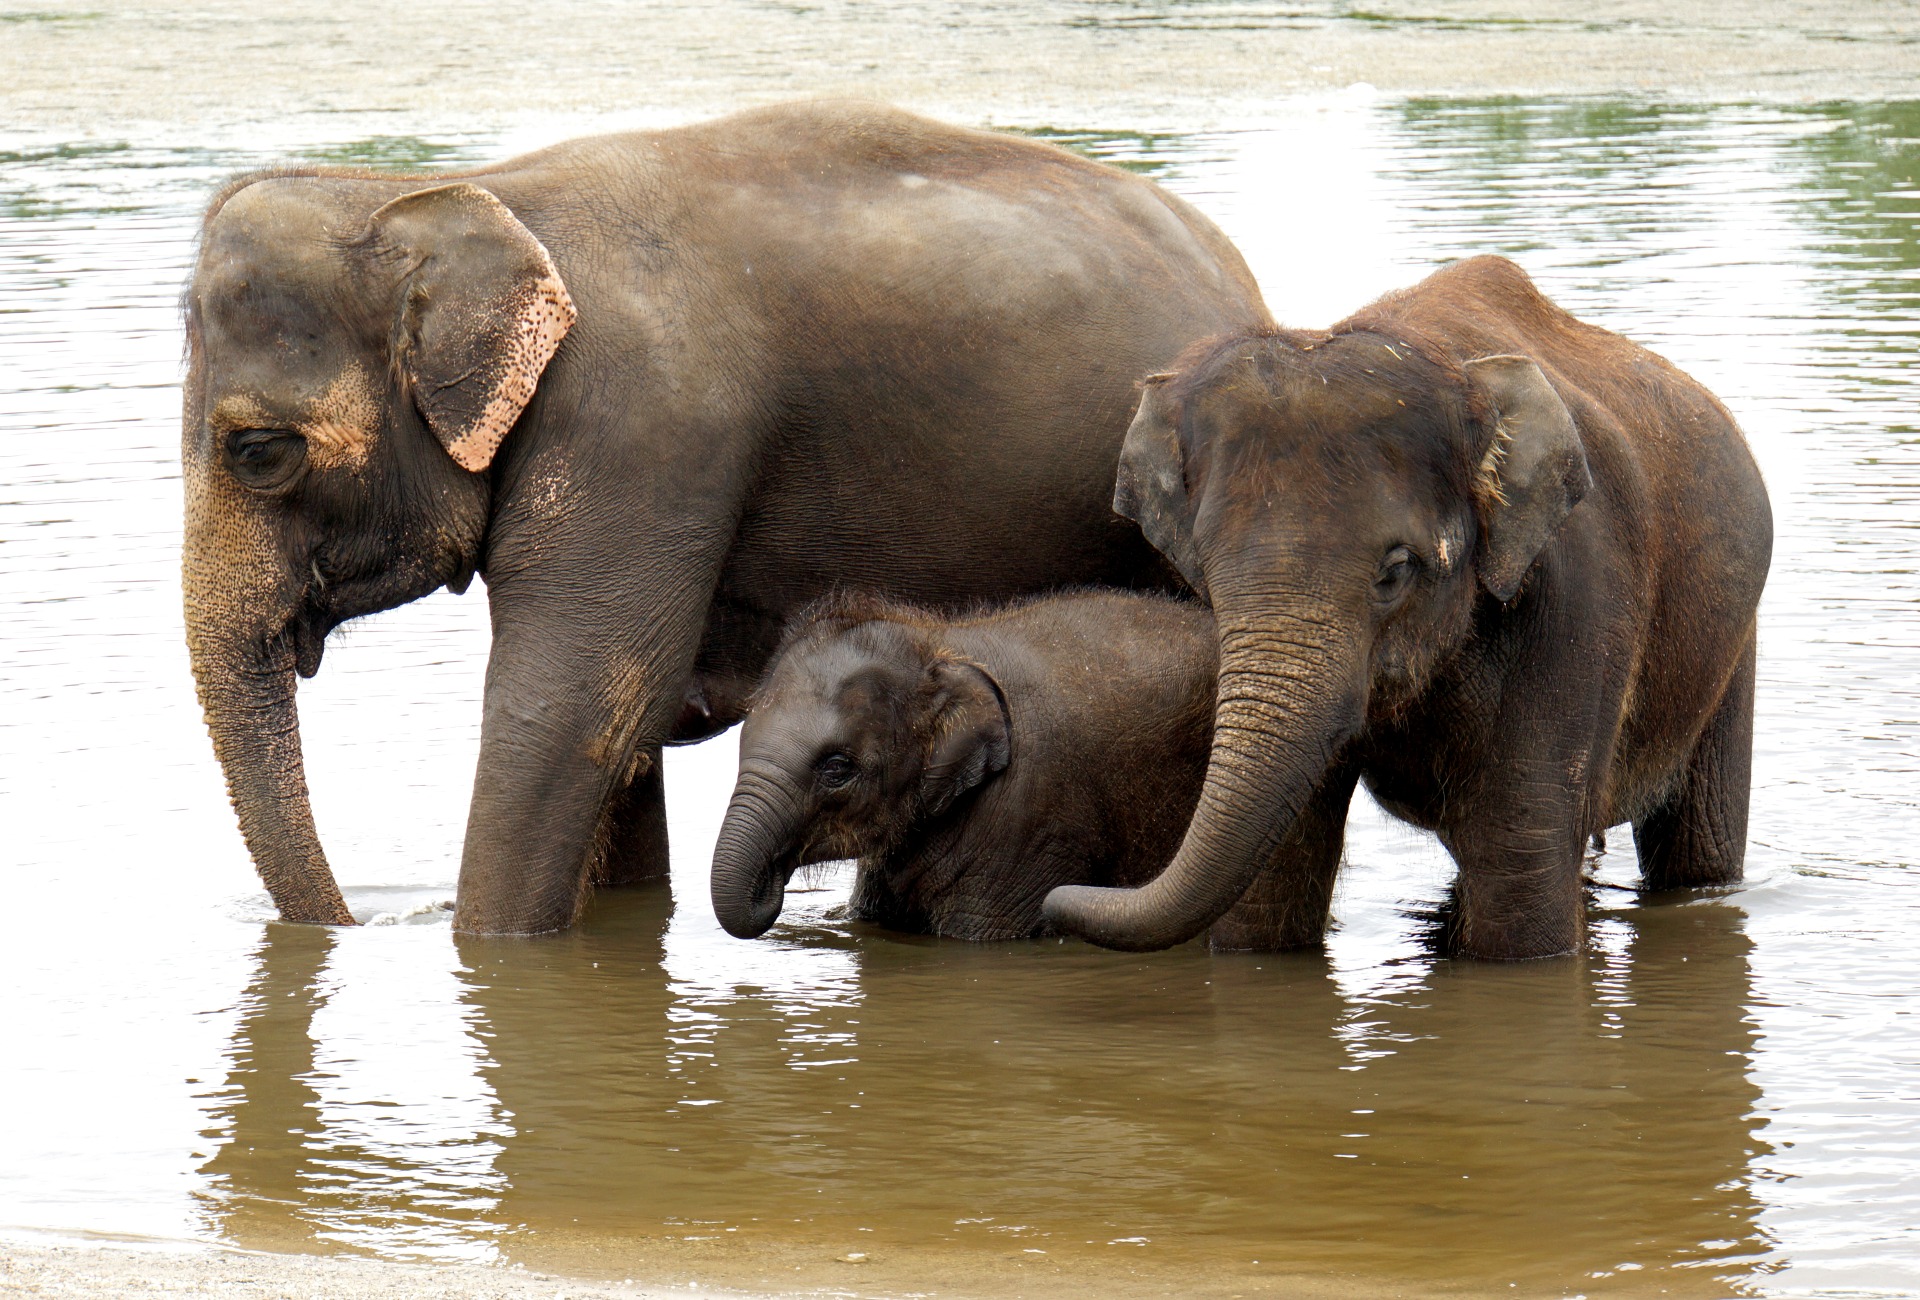 The Endangered Asian Elephant, by Dennis Jarvis/Flickr